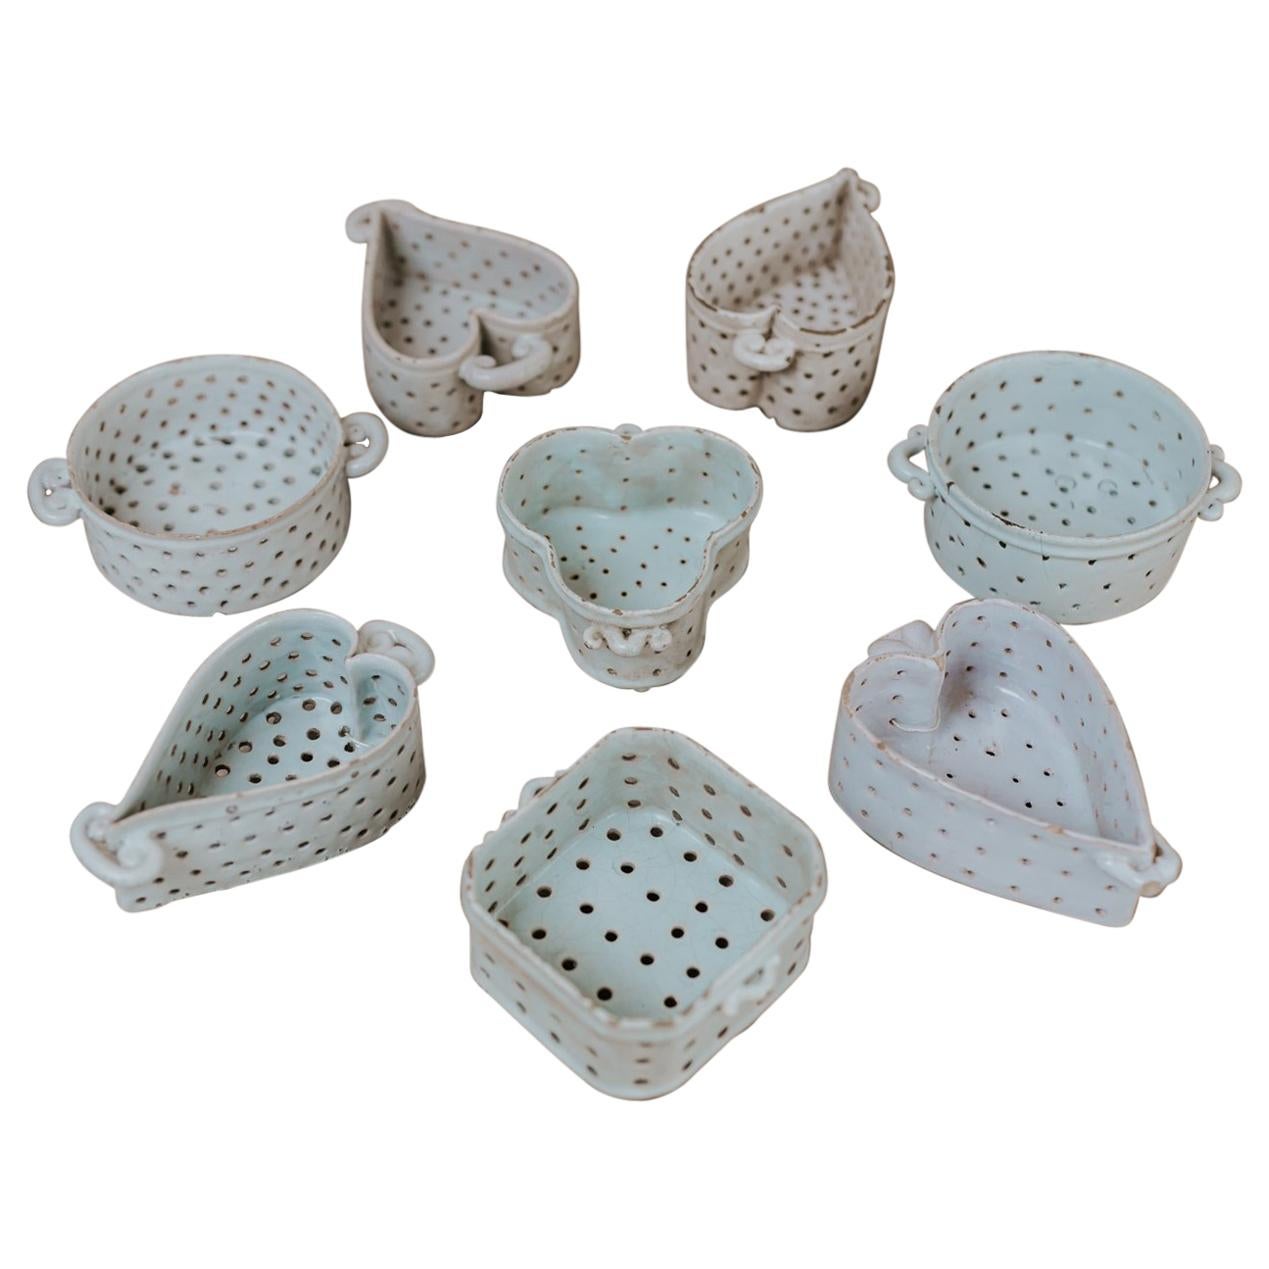 Collection of Porcelain Cheese Moulds